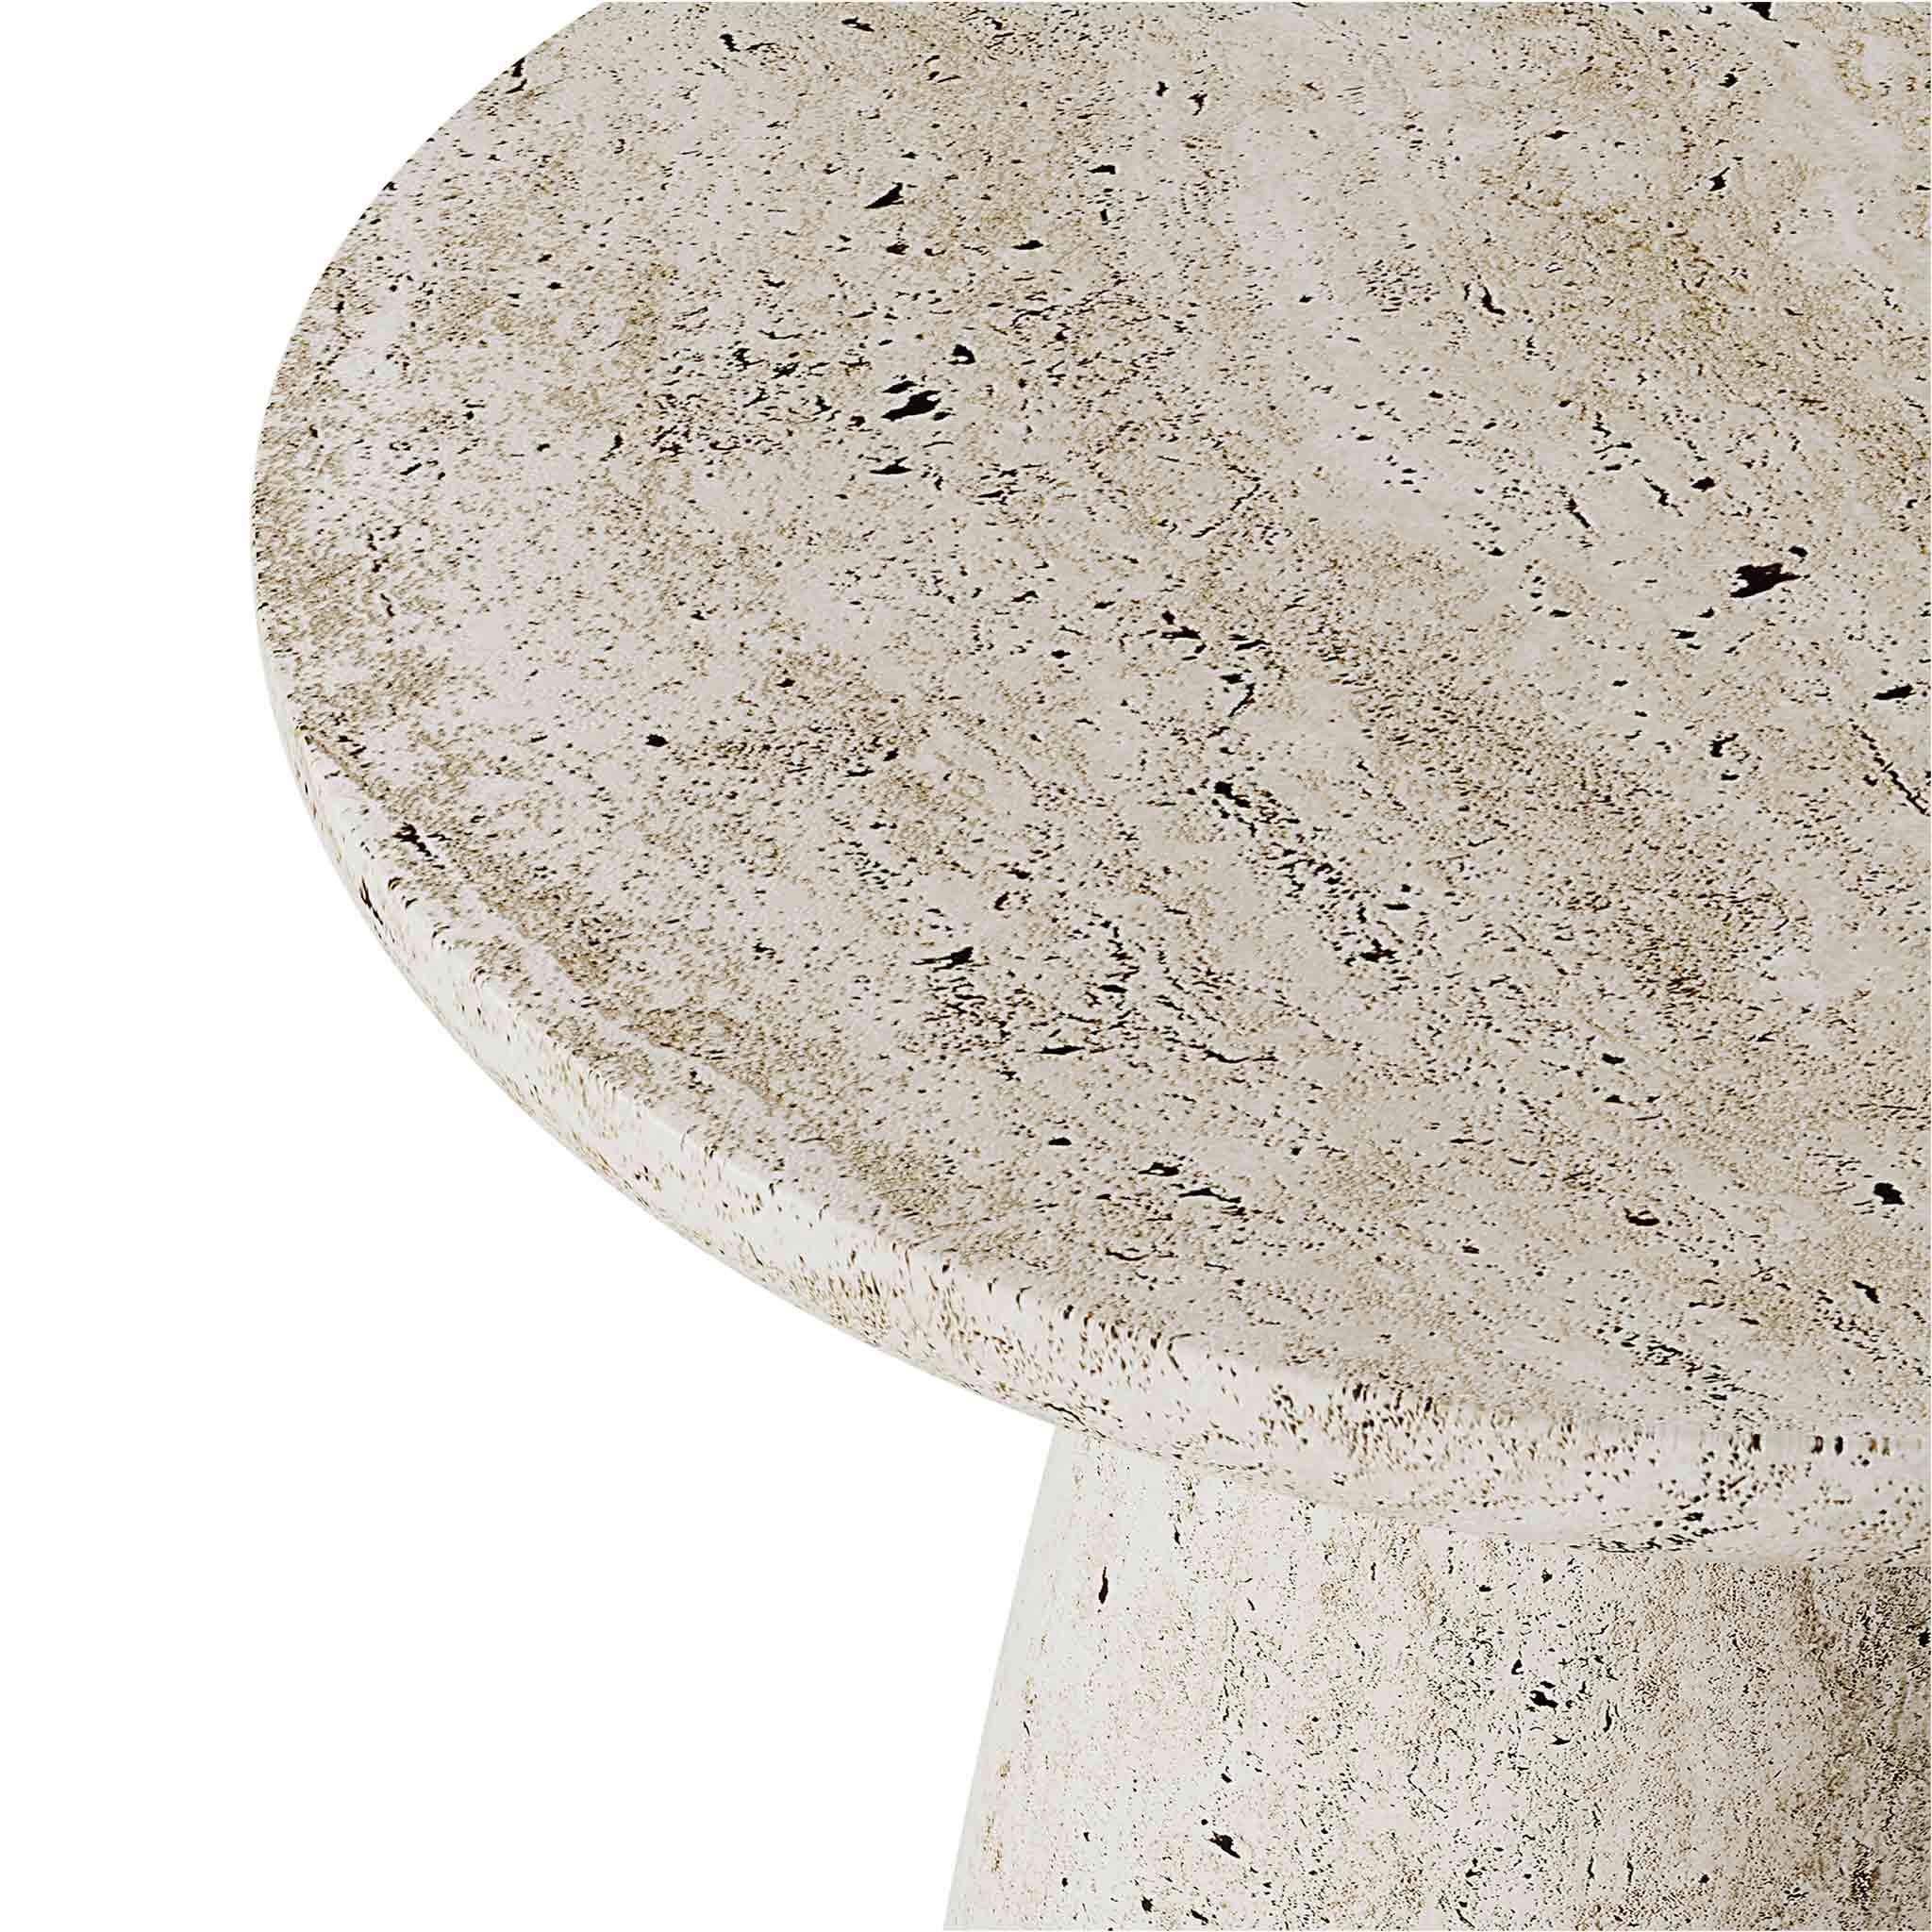 Lunarys Large Side Table is an outstanding modern design piece. A key side table for a contemporary living room project seems to come directly from space. Made in travertine stone is perfect for indoor or outdoor projects.

Materials: Body in